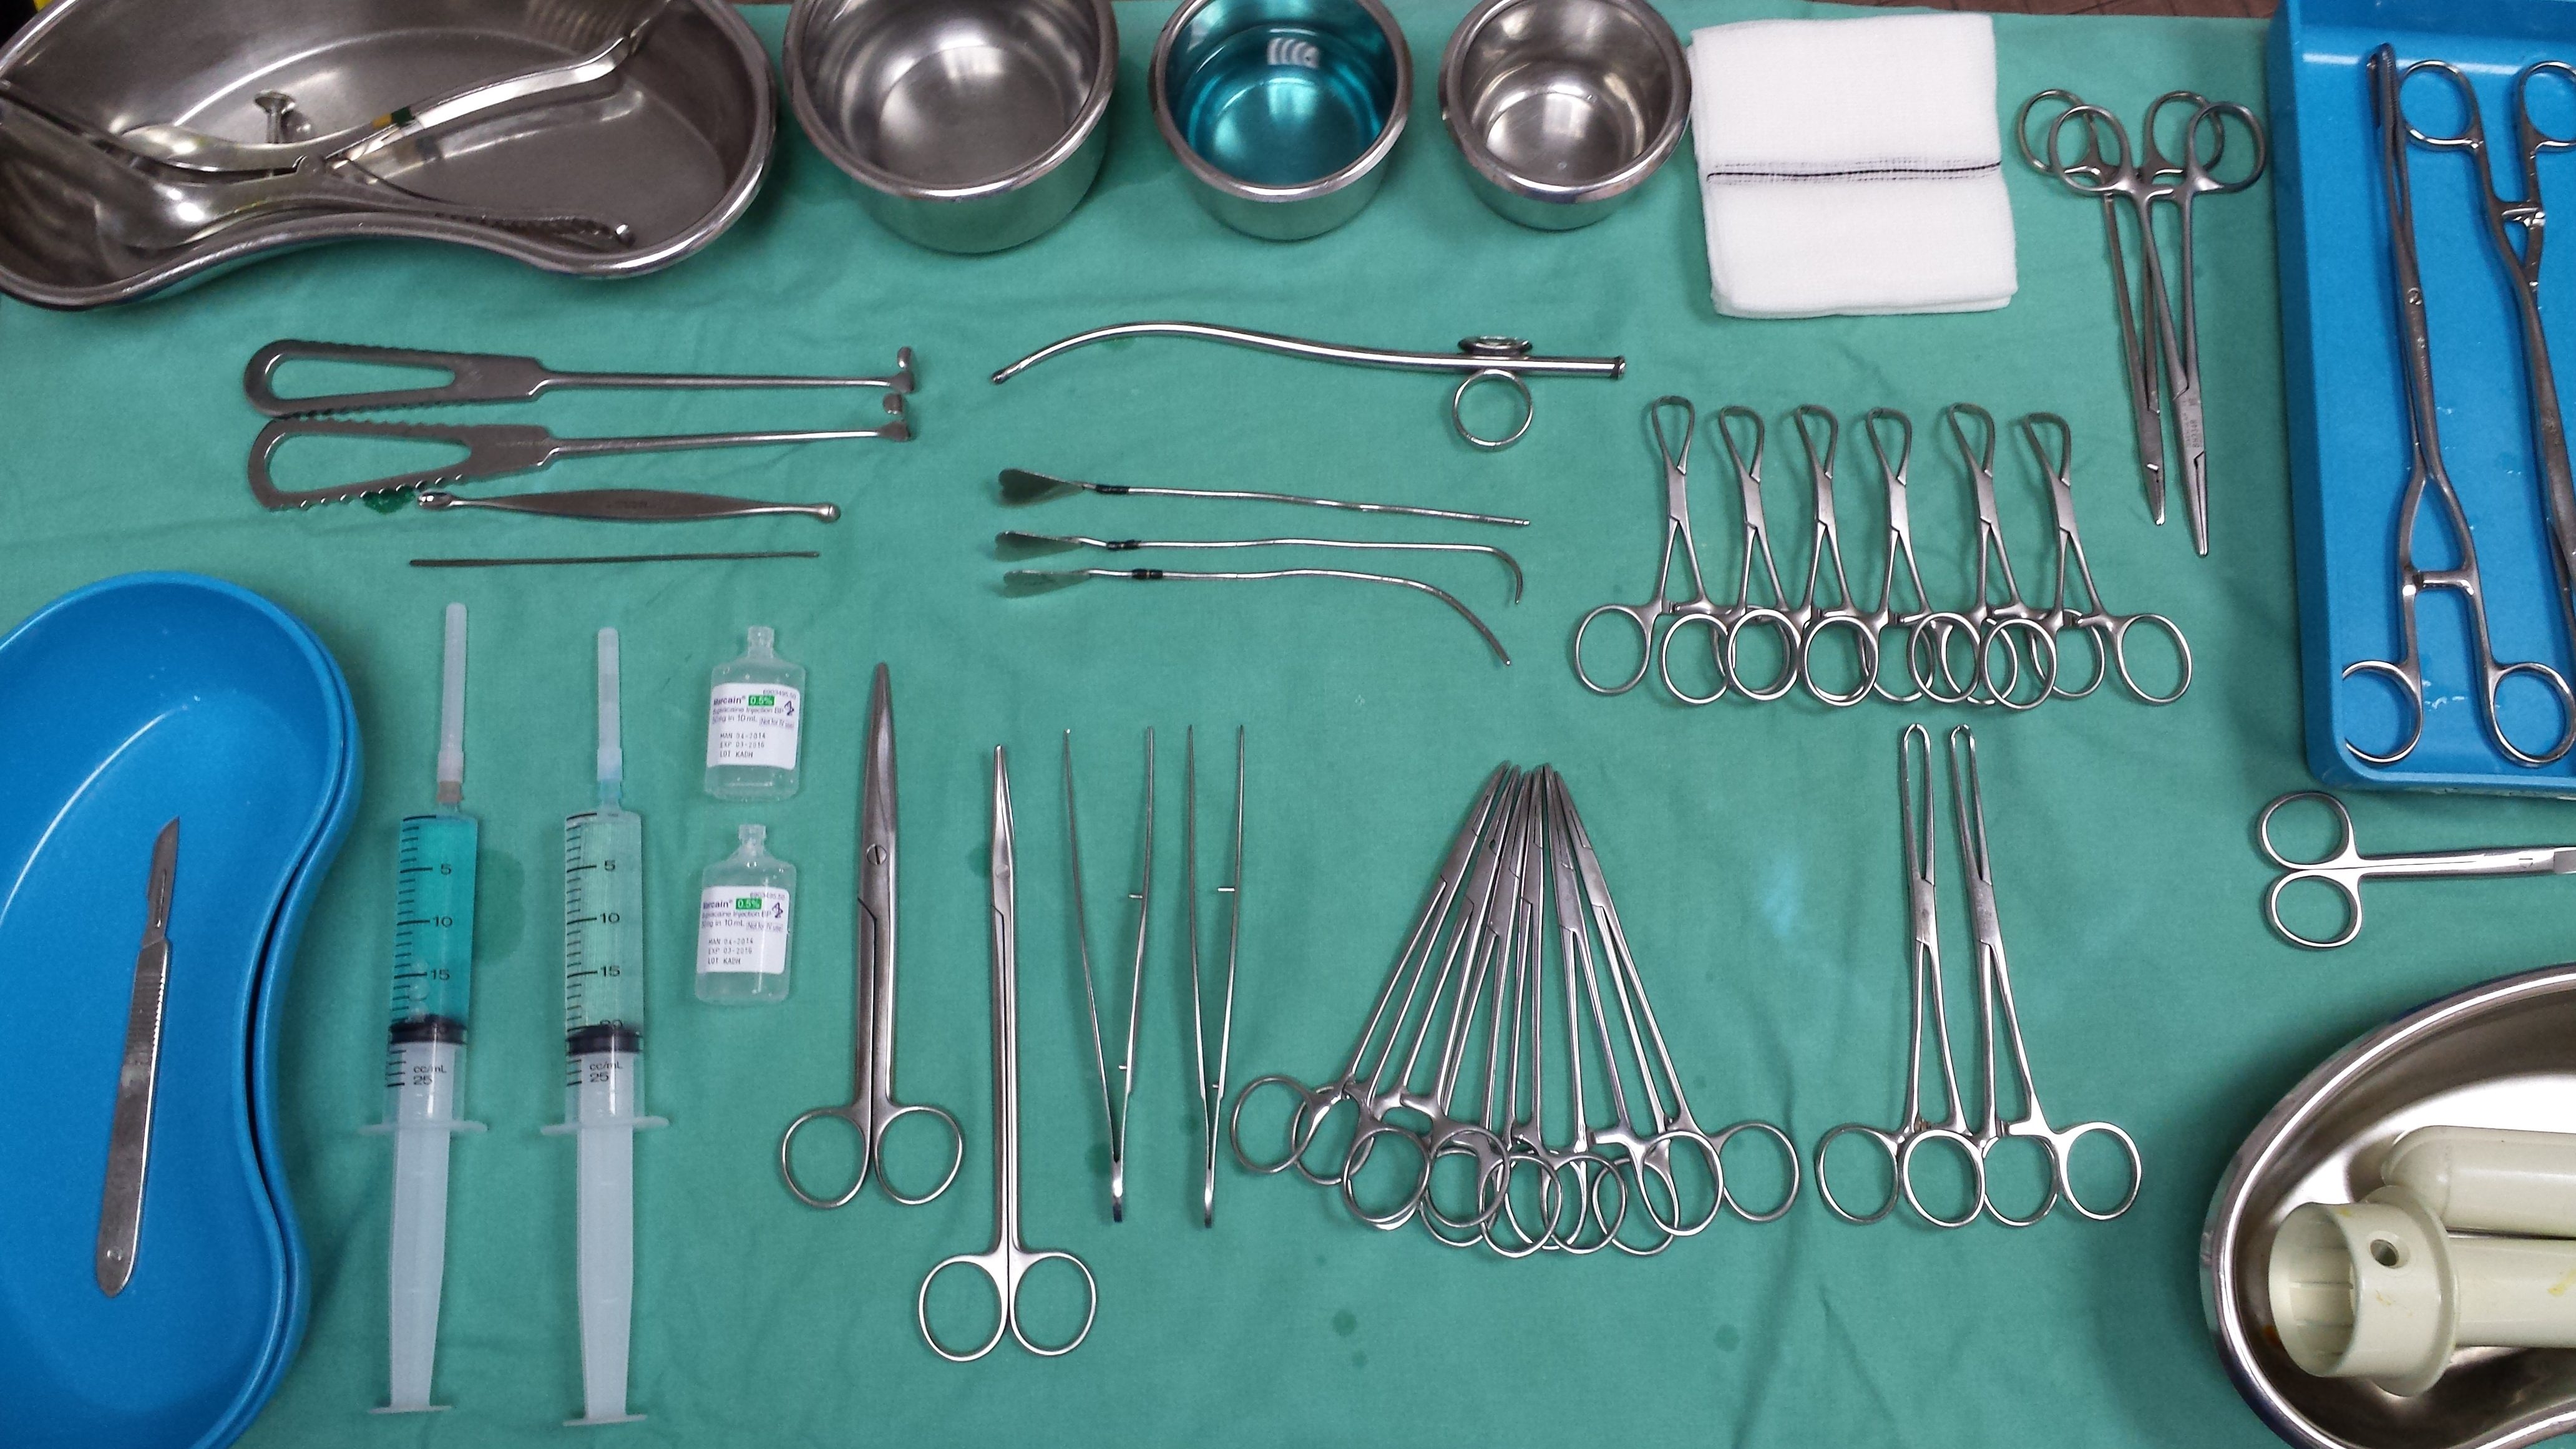 Teen Creates Life-Saving Sutures to Prevent Post-Surgery Deaths